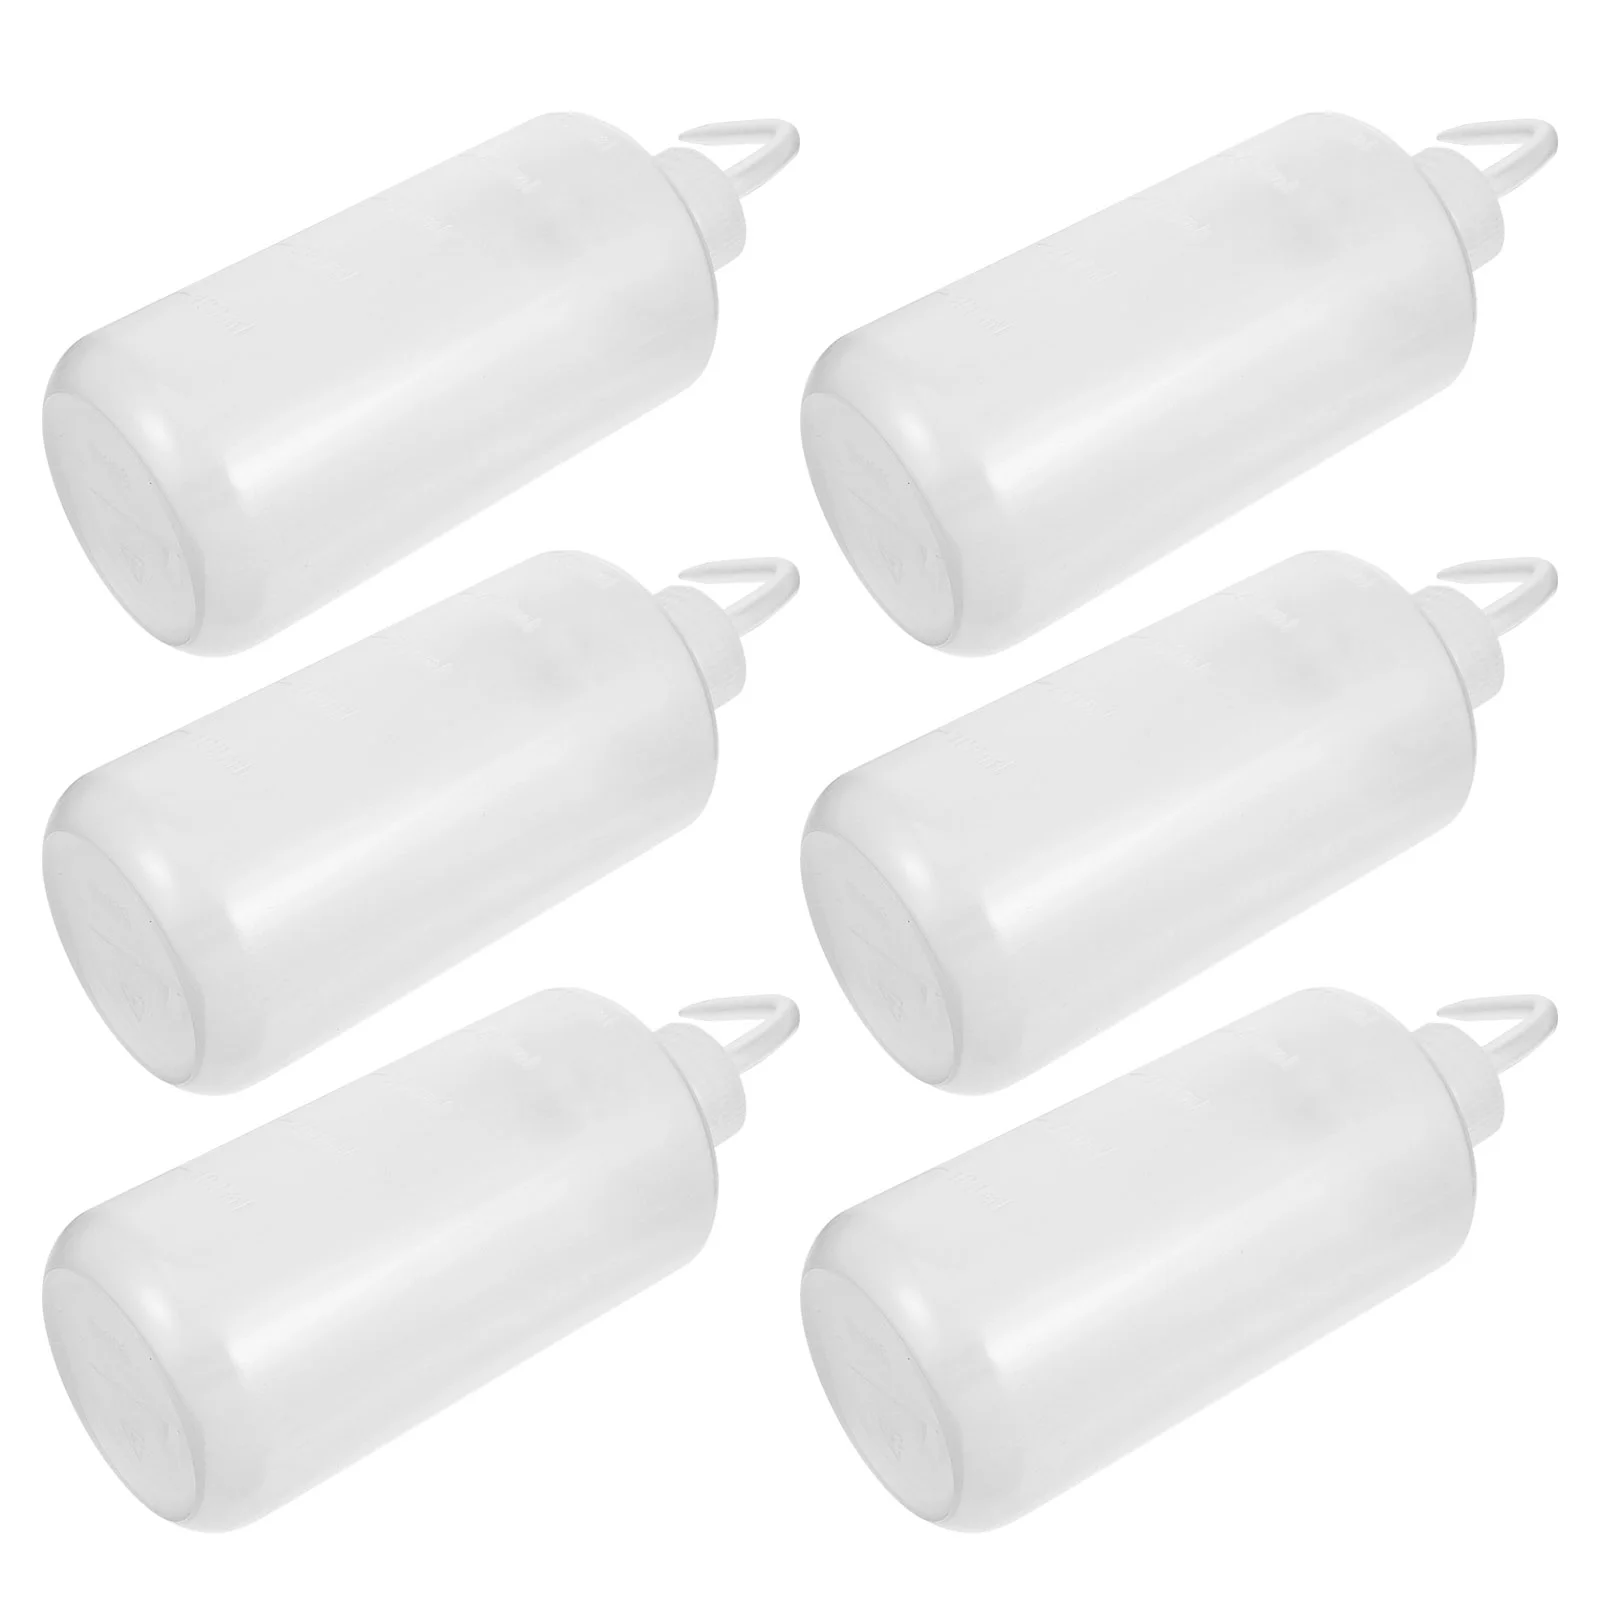 

6 Pcs Graduated Rinse Bottle Squeeze Bottles Washing Plastic Empty Refillable with Scale Safety